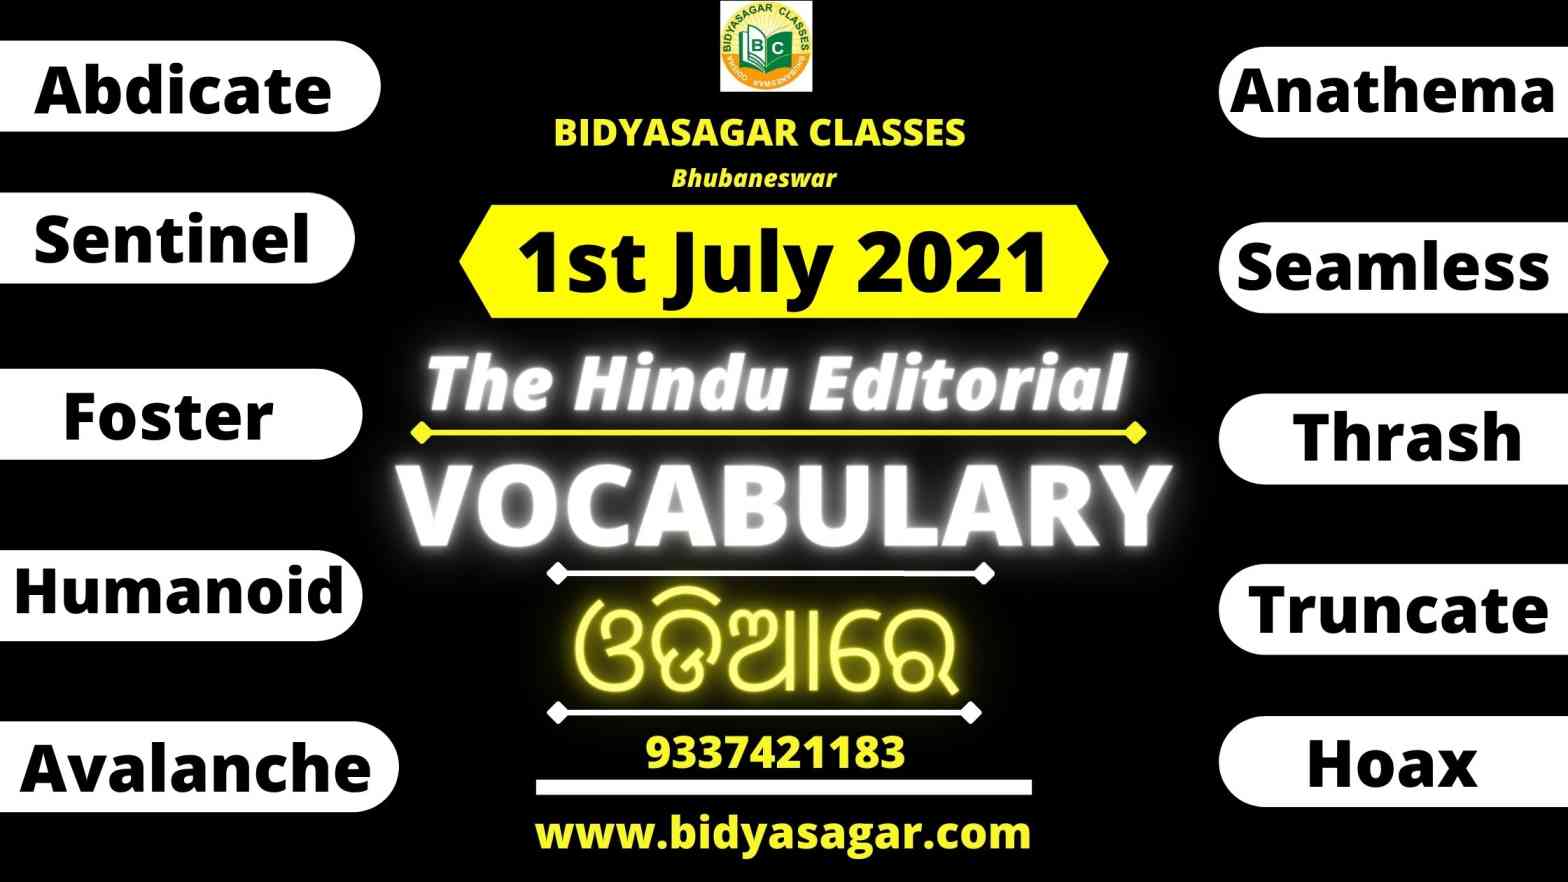 The Hindu Editorial Vocabulary of 1st July 2021